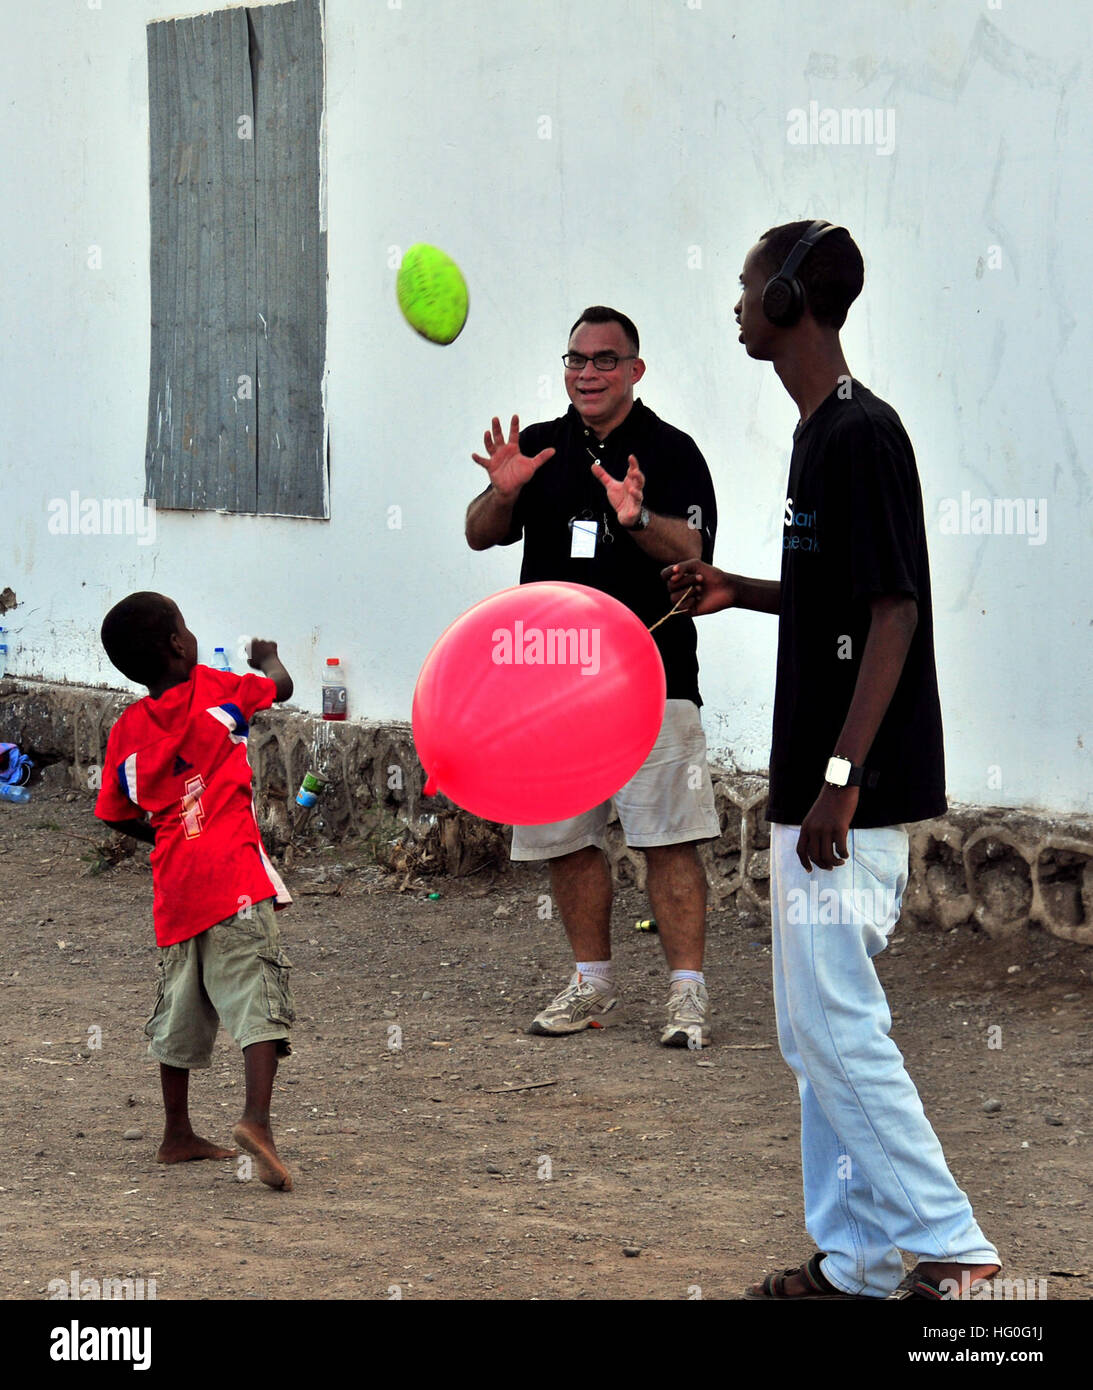 Navy Chaplain Lt. Tom Bingol, assigned to guided-missile frigate USS Halyburton (FFG 40), throws a football with a local boy during a community relations (COMREL) event. Halyburton is deployed with Commander, Task Group (CTG) 508, promoting maritime security operations and theater security cooperation efforts in the U.S. 5th Fleet area of responsibility. (U.S. Navy photo by Mass Communication Specialist 2nd Class Scott Raegen/Released) USS Halyburton (FFG 40) 121105-N-YG591-161 Stock Photo